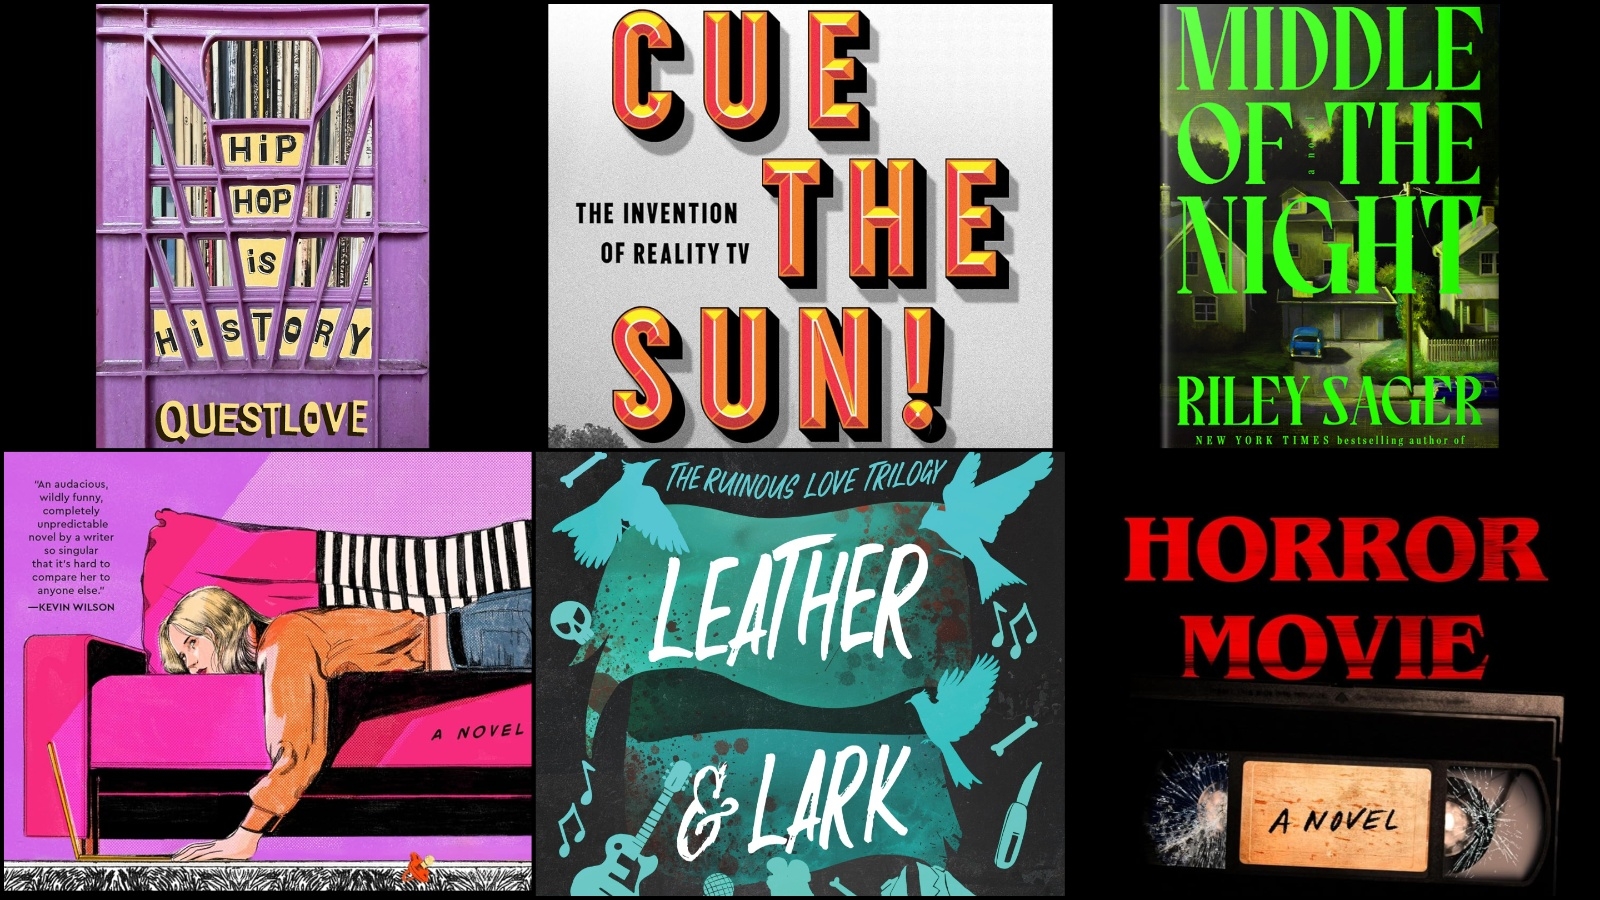 10 books you should read in June, including Questlove’s hip-hop memoir, a reality TV history by a Pulitzer Prize winner, and a new romance from Brynne Weaver